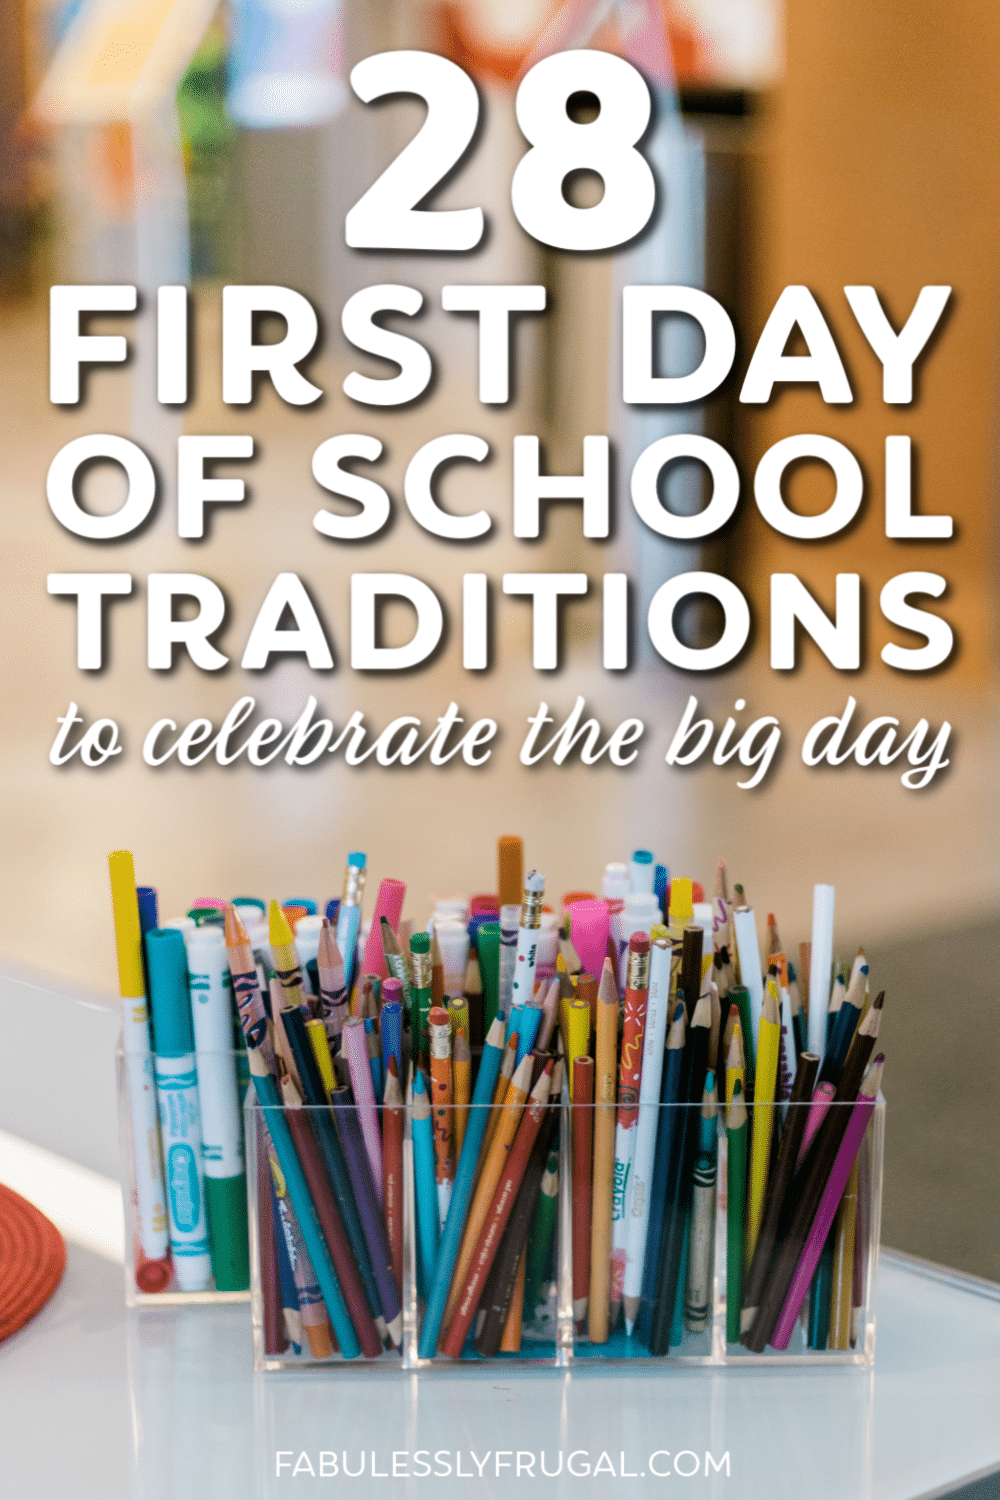 First day of school traditions